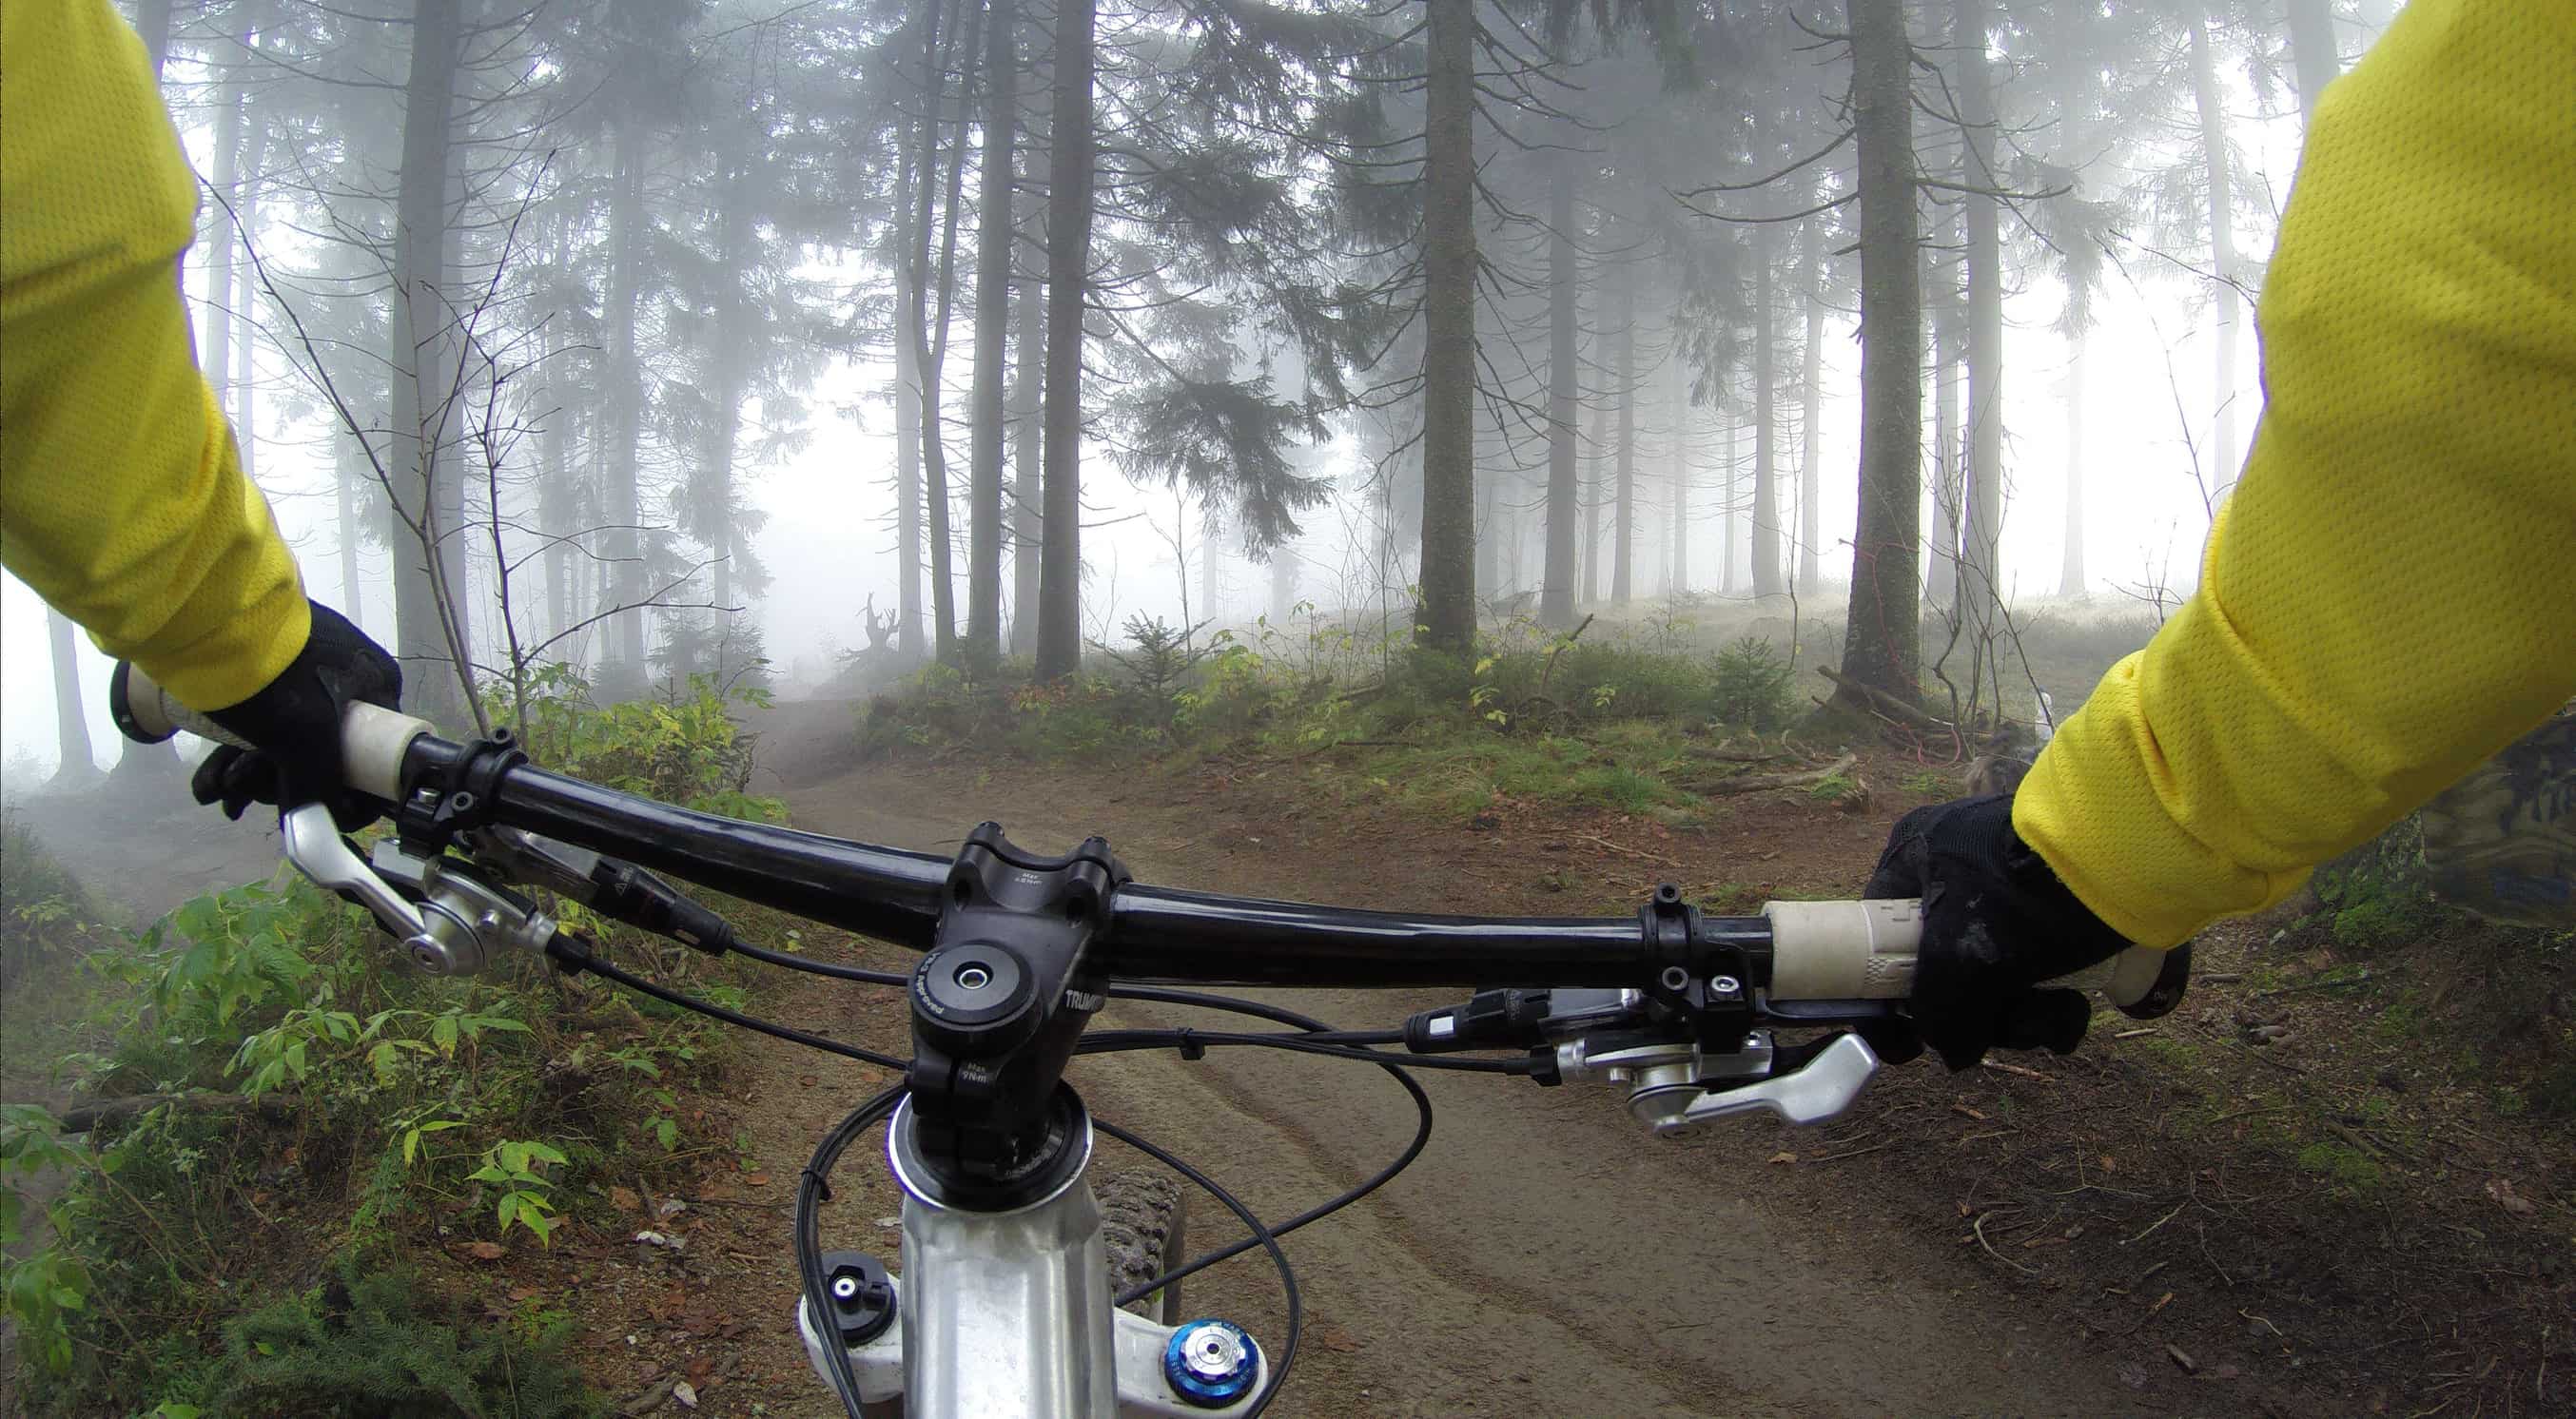 bike riding in woods